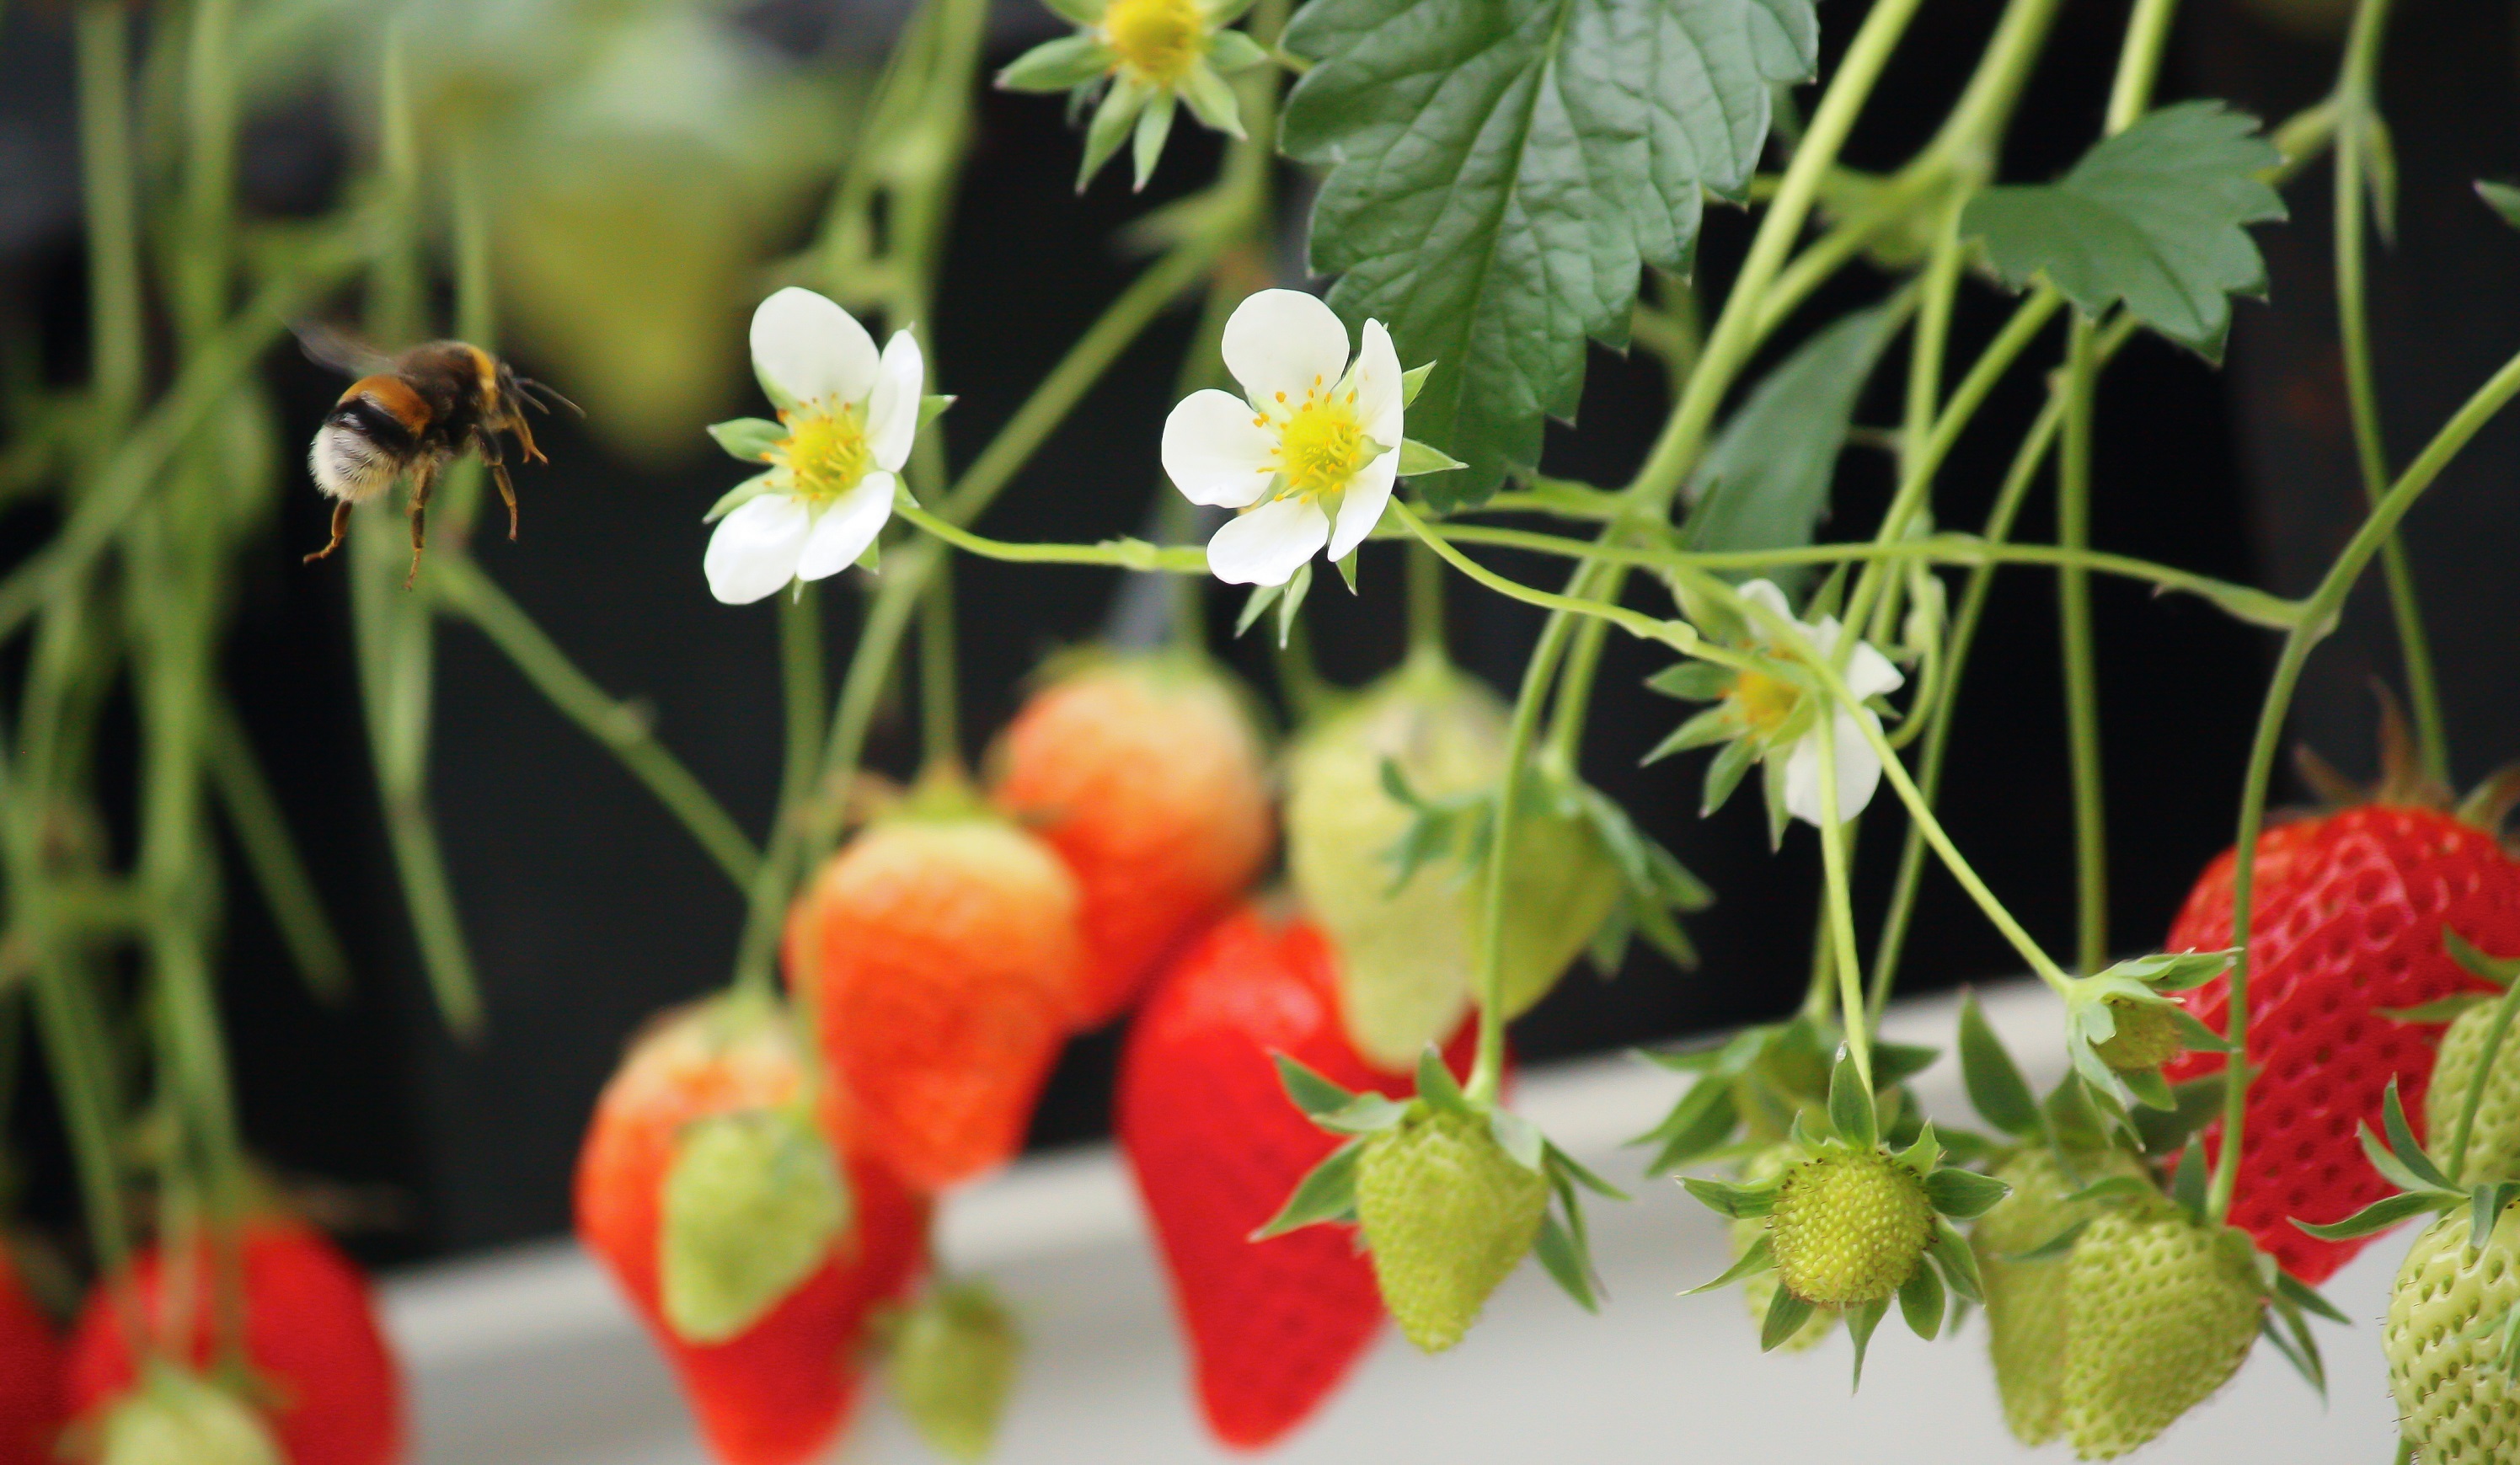 Bumblebees pollinate strawberry flowers